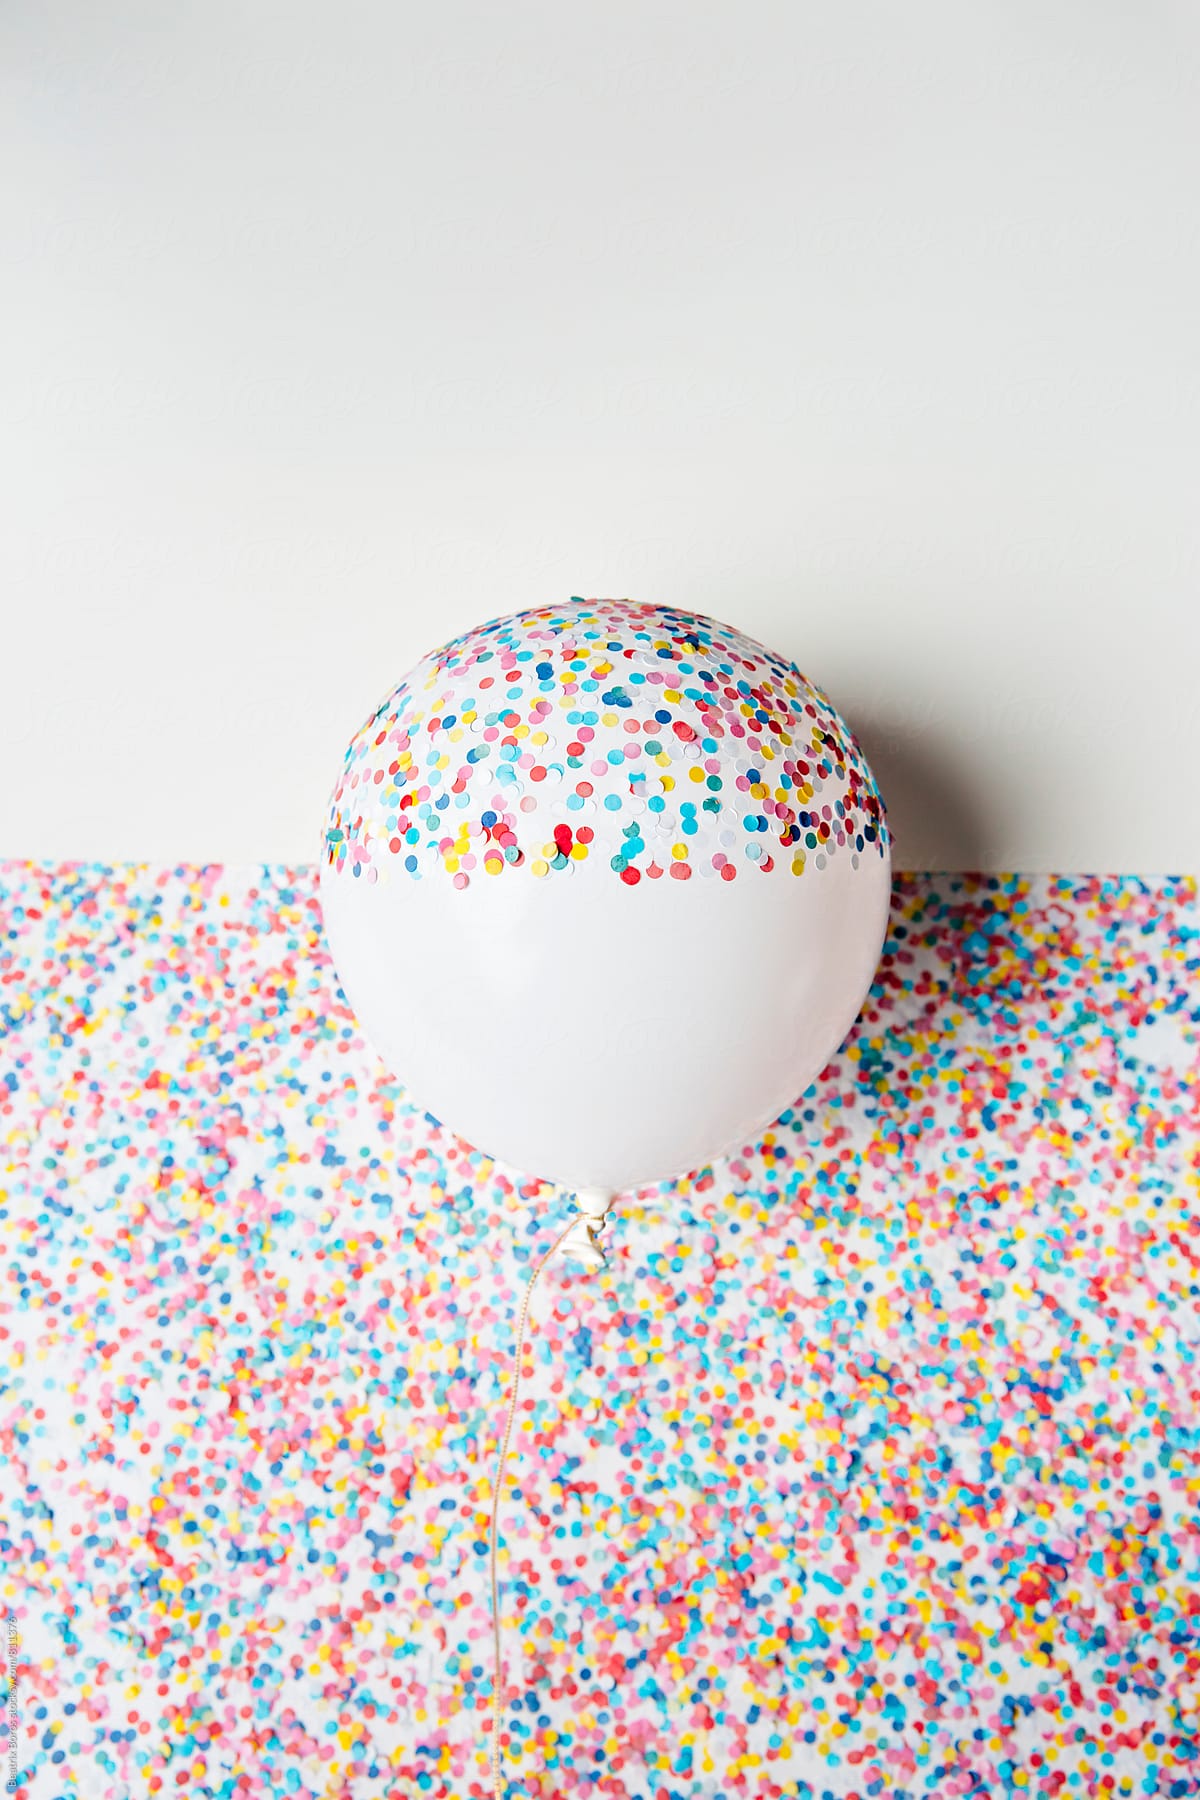 Balloon half covered with confetti